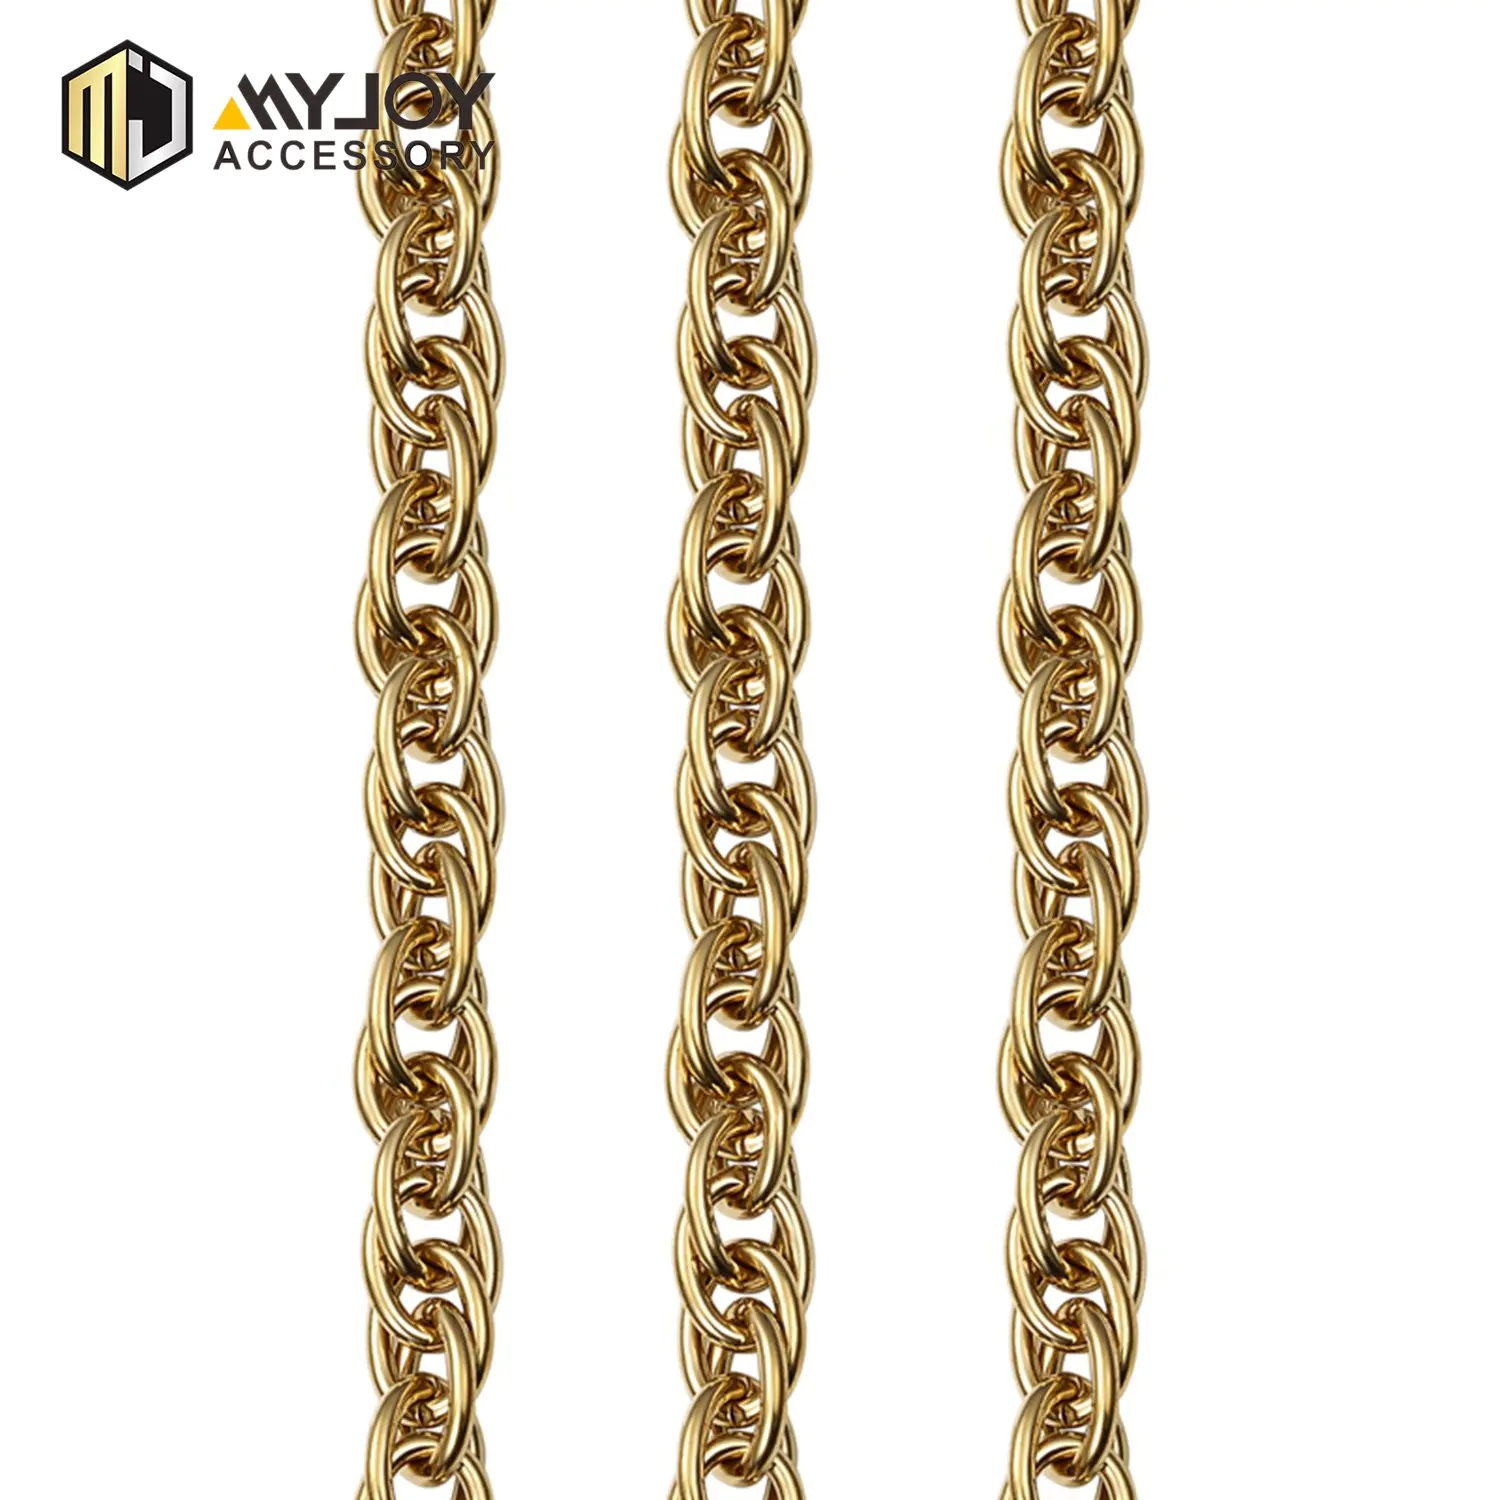 MYJOY vogue handbag strap chain for sale for bags